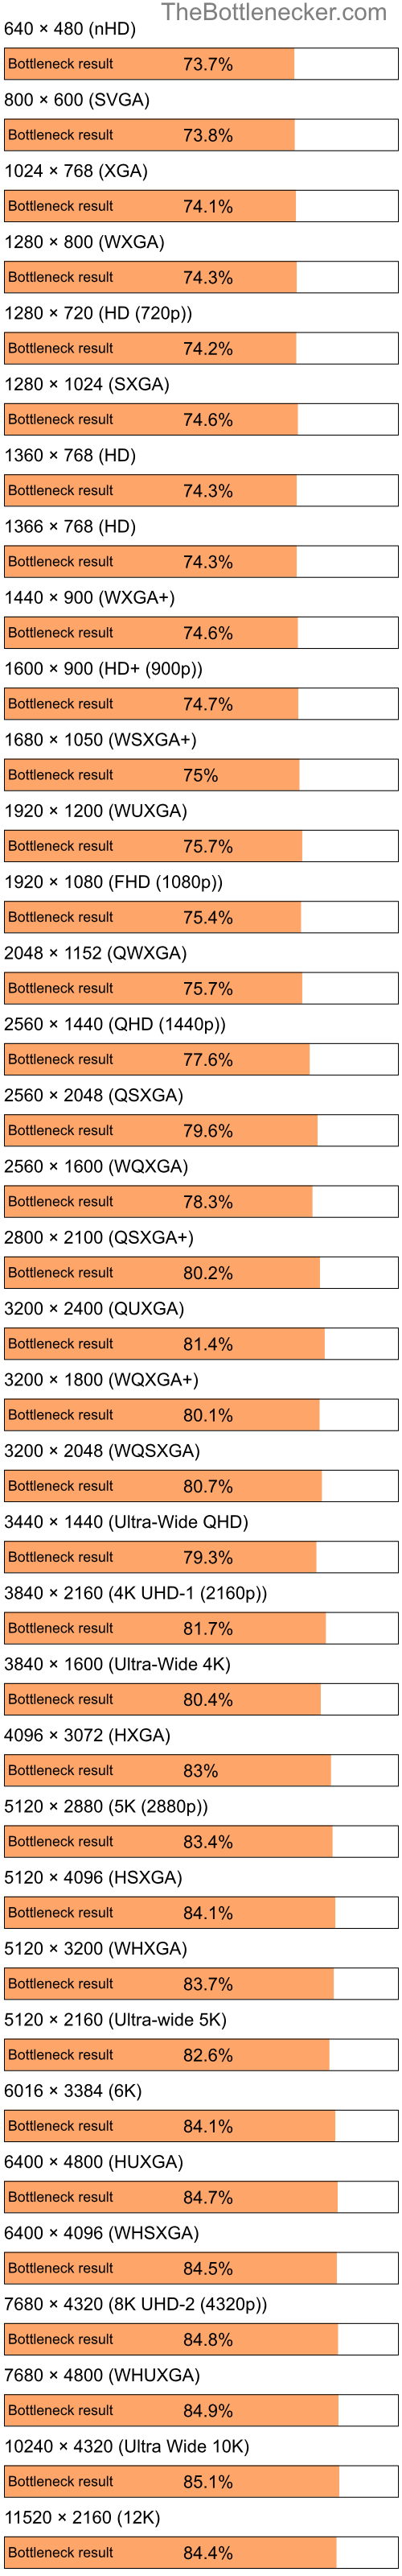 Bottleneck results by resolution for Intel Celeron M 420 and AMD Radeon HD 2350 in Graphic Card Intense Tasks